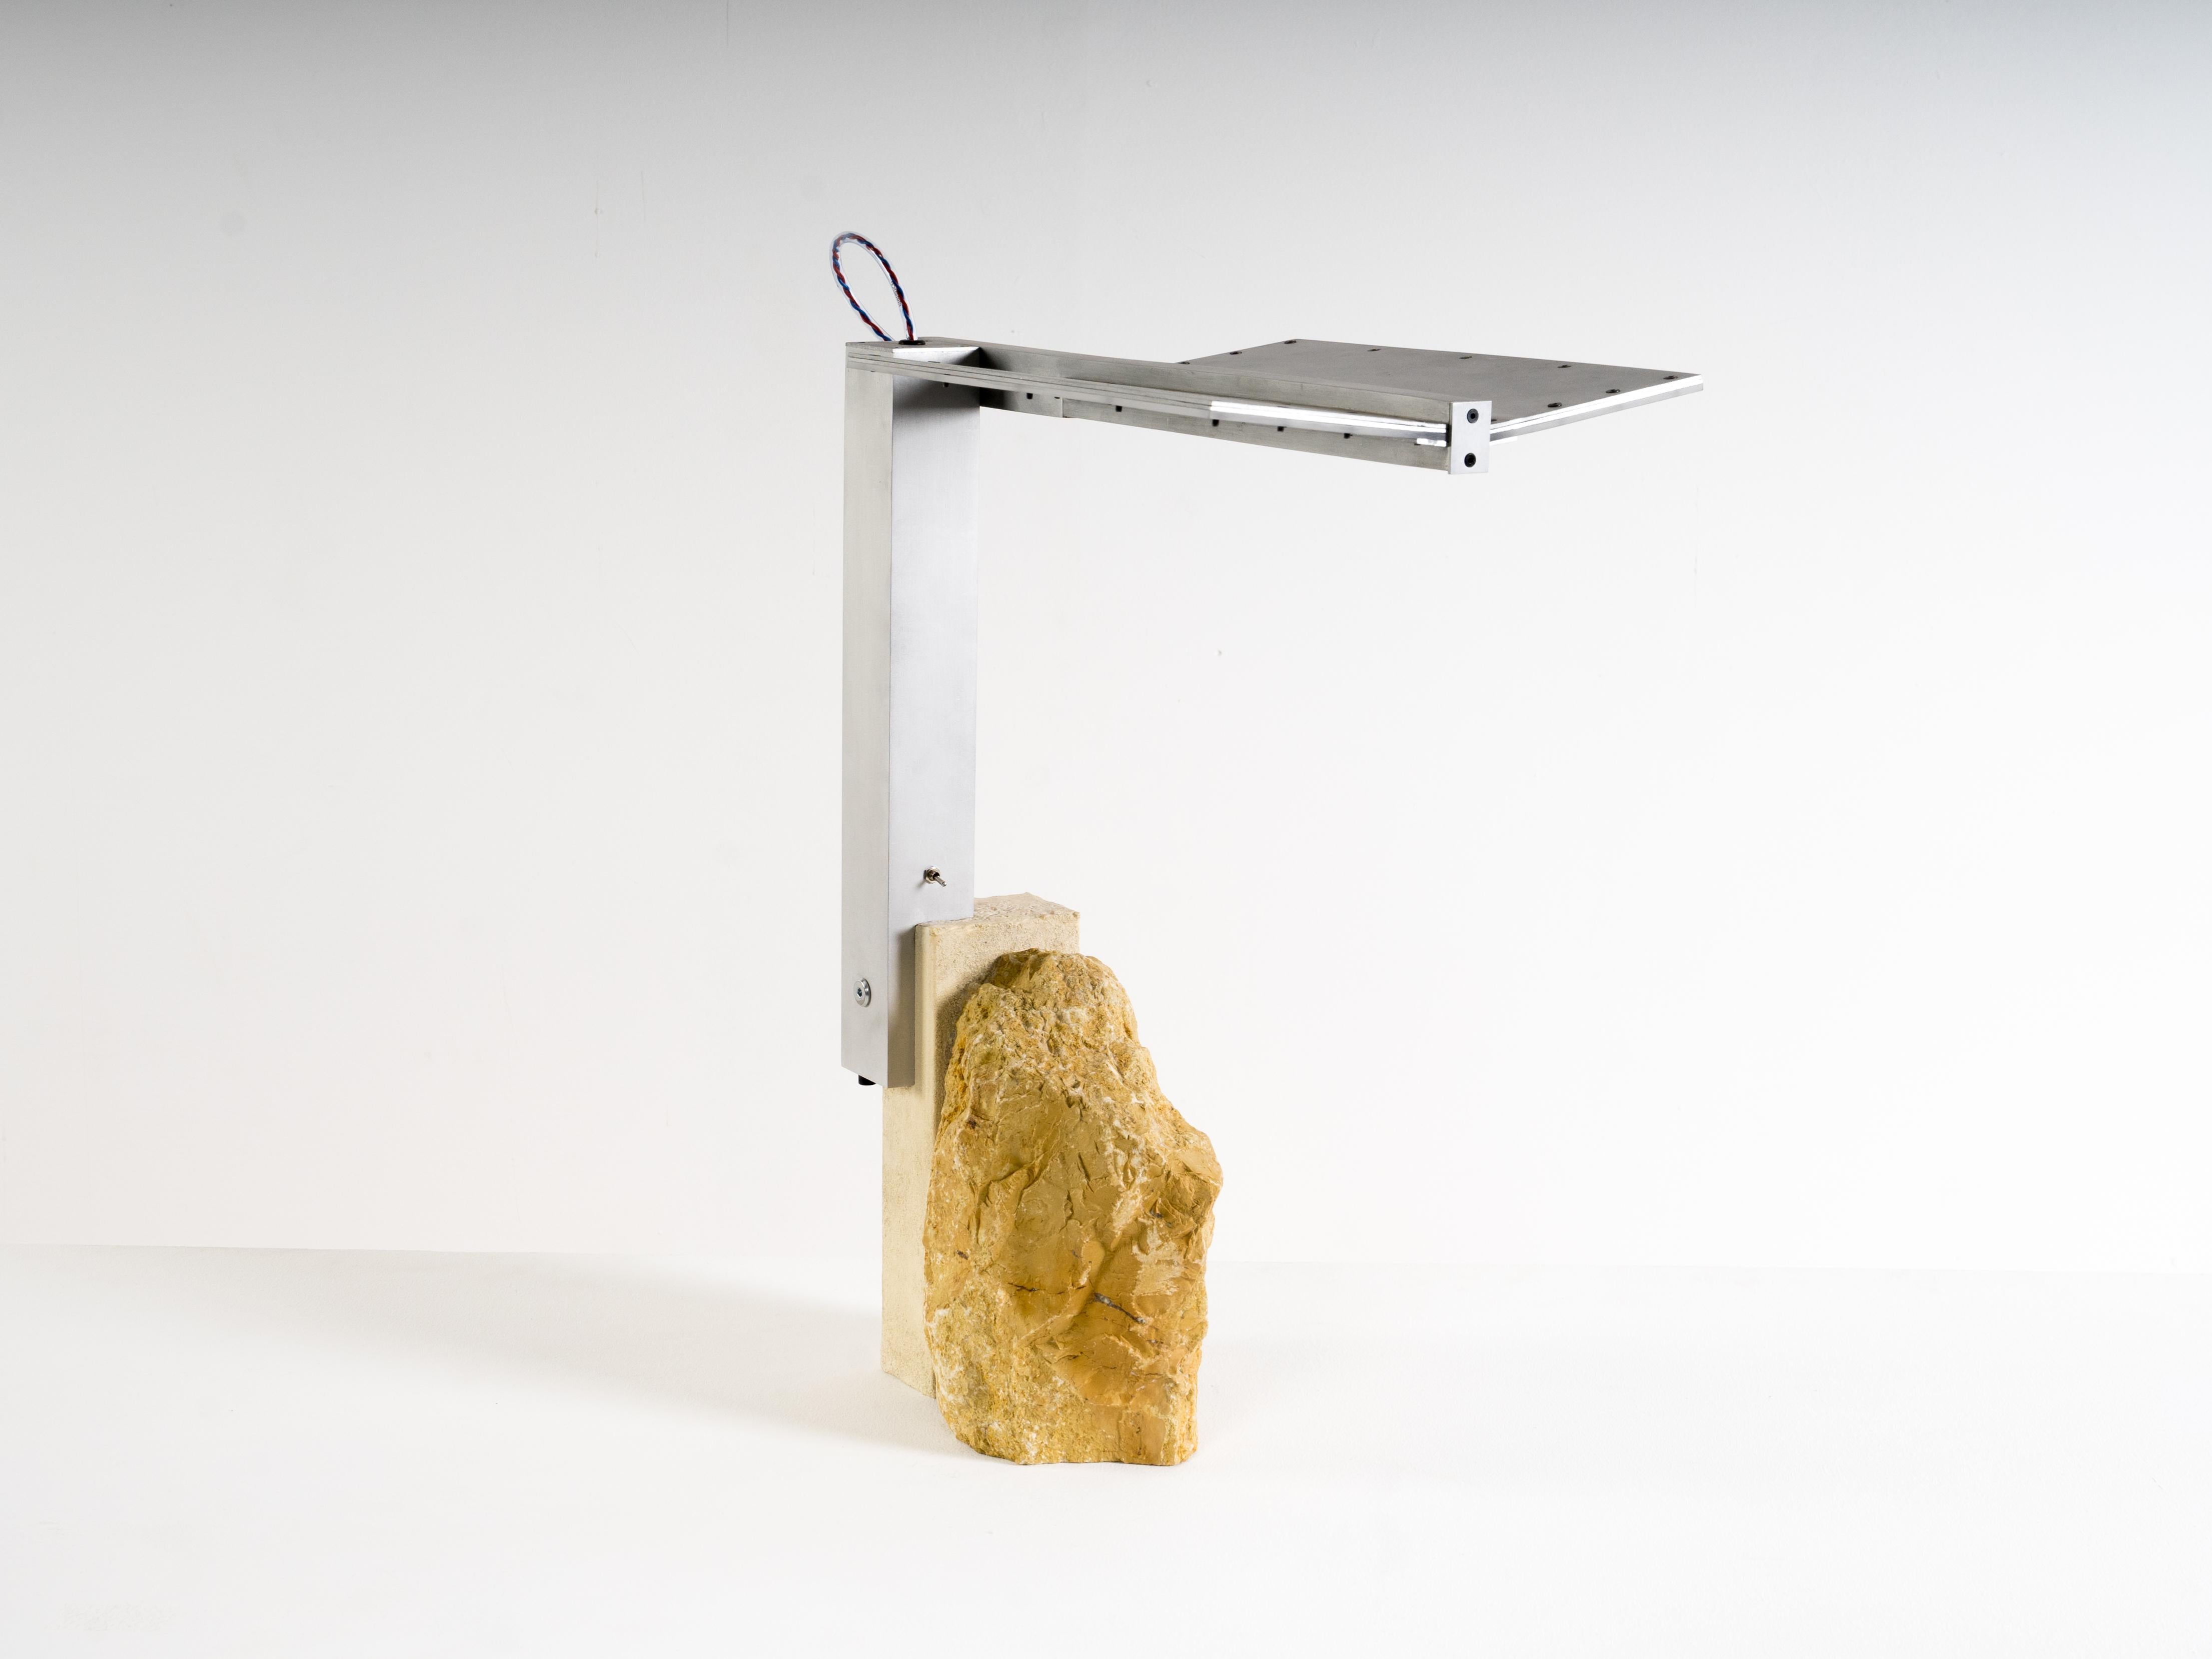 Other Table Lamp, Foreign Bodies - ARKMDS-1, aluminium, rock – By Collin Velkoff For Sale